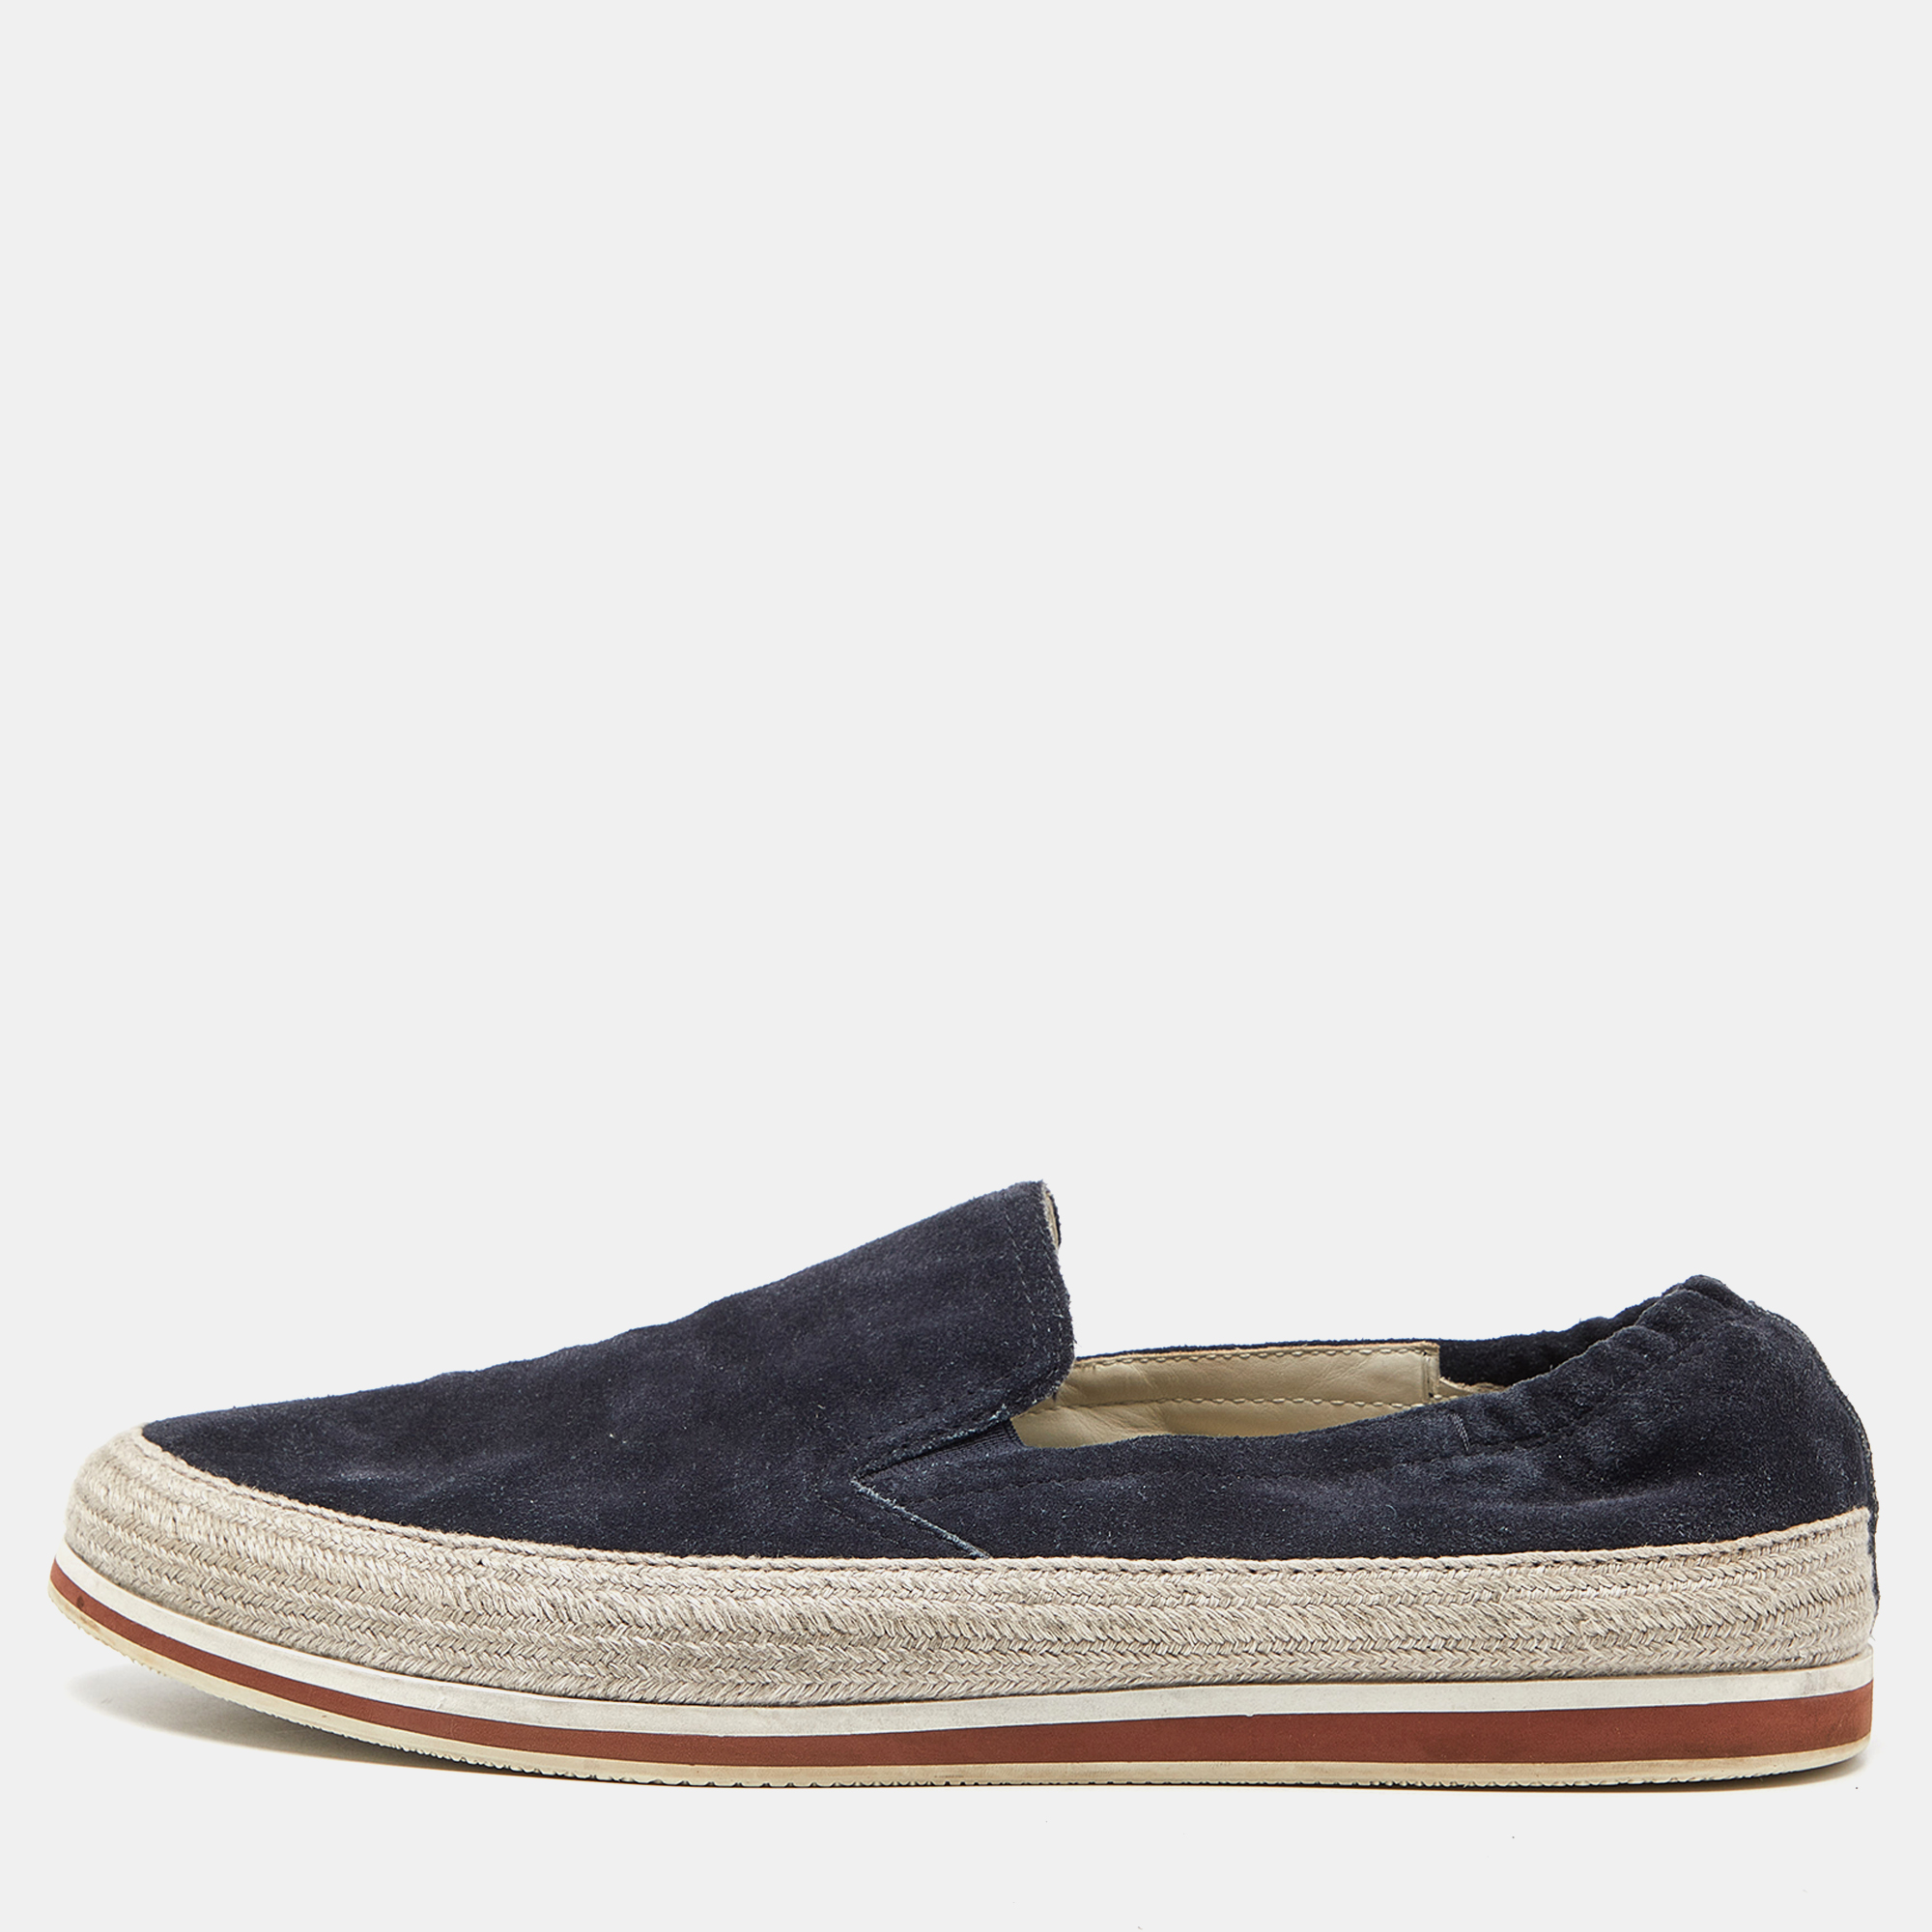 Pre-owned Prada Blue Suede Espadrille Slip On Trainers Size 40